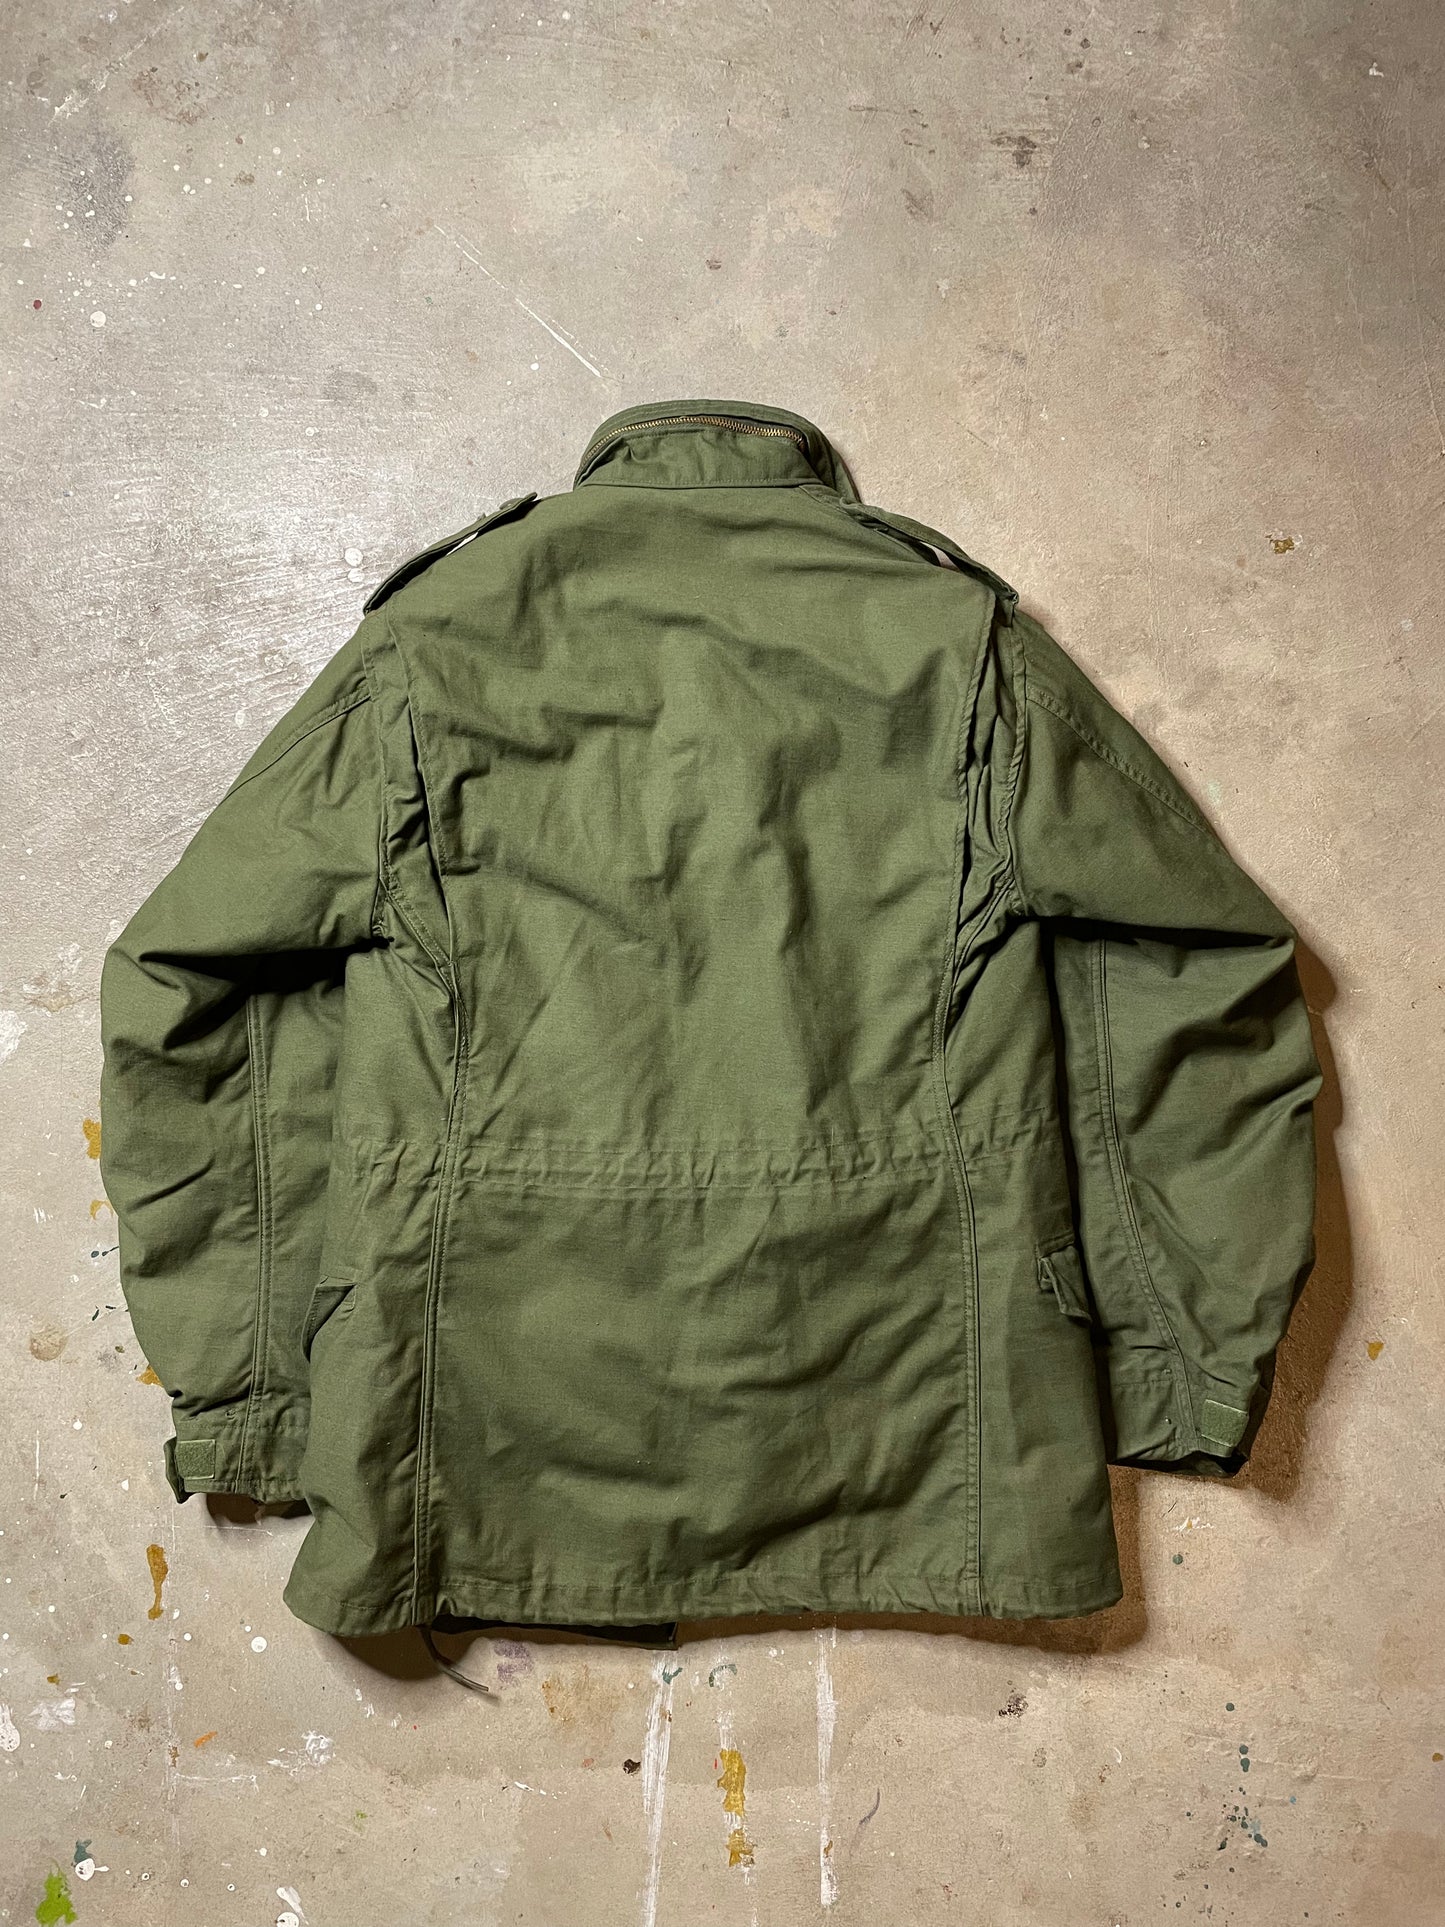 Vintage Lined Army Jacket